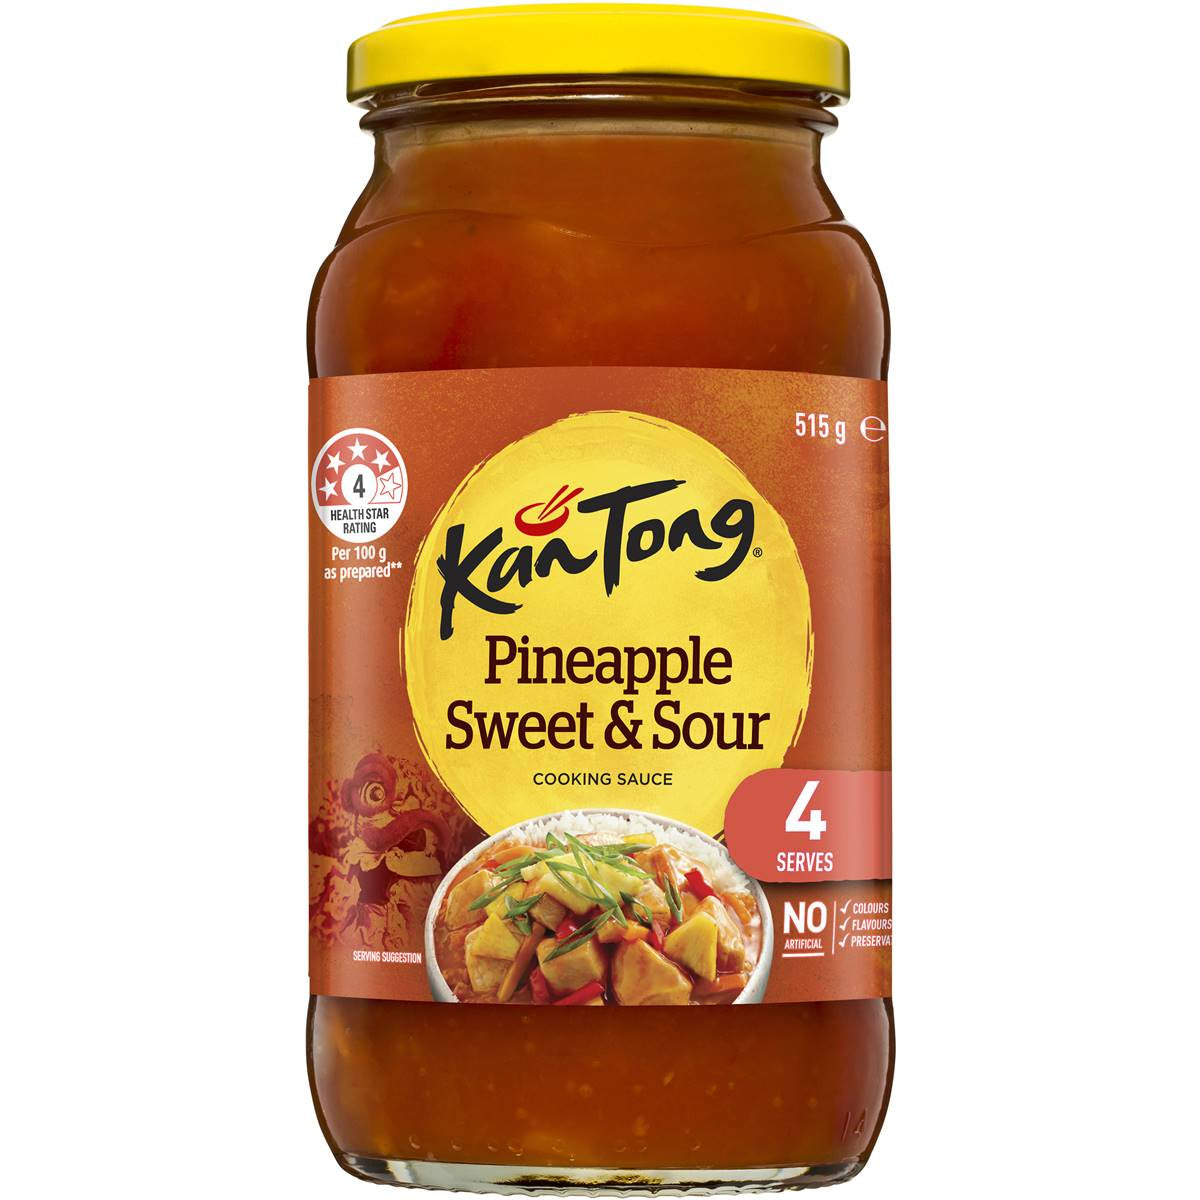 Kantong Pineapple Sweet and Sour 515g